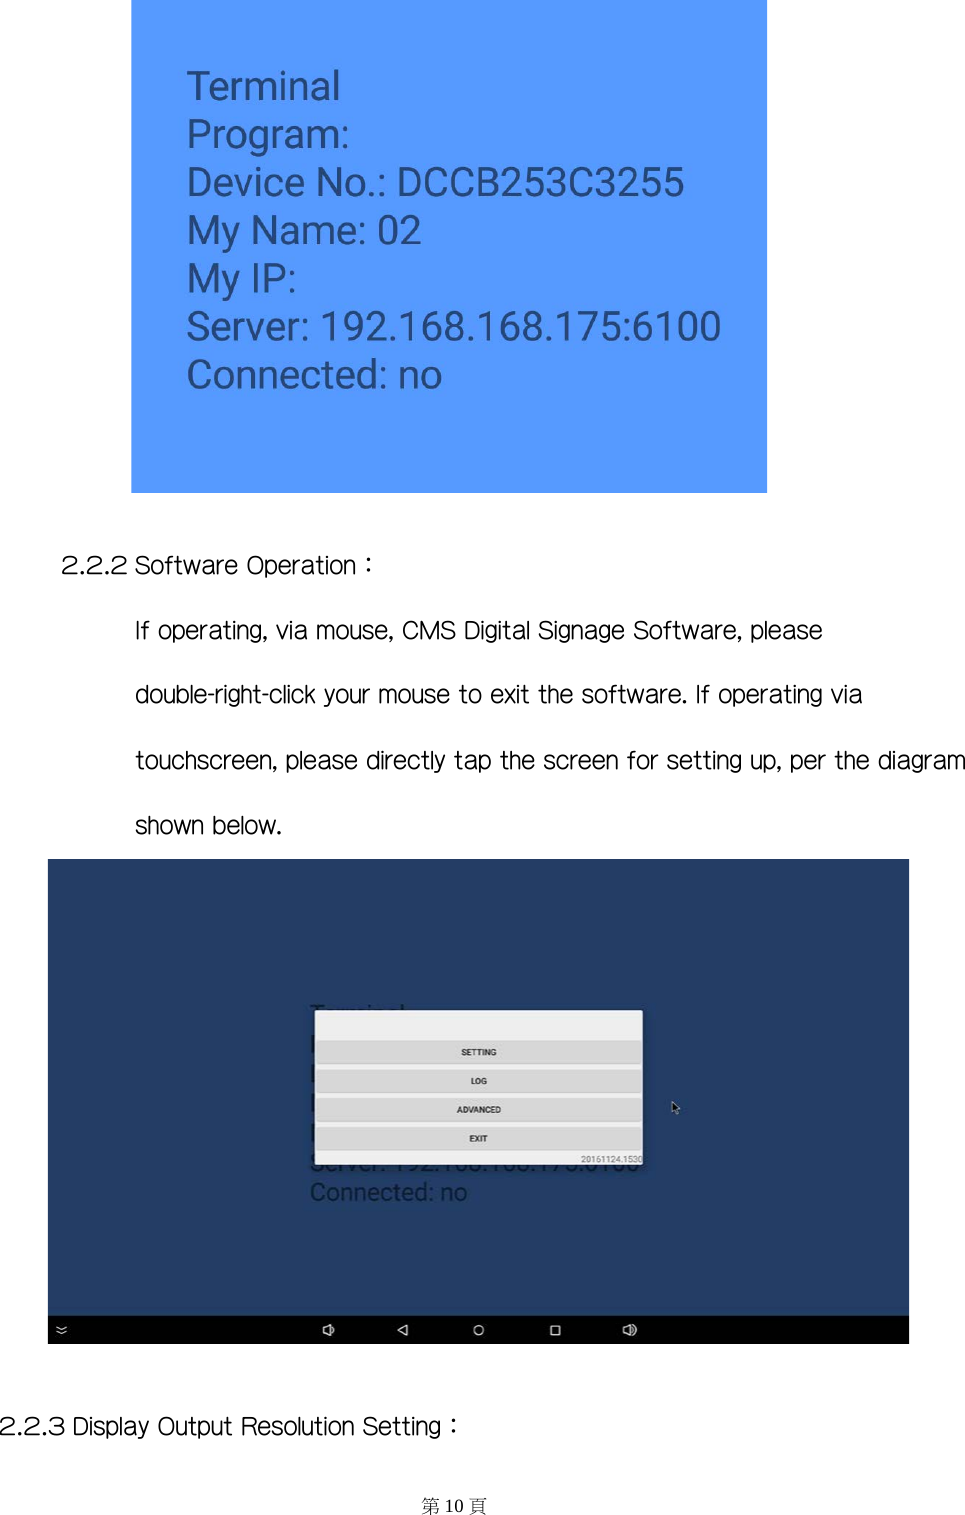   2.2.2 Software Operation： If operating, via mouse, CMS Digital Signage Software, please double-right-click your mouse to exit the software. If operating via touchscreen, please directly tap the screen for setting up, per the diagram shown below.   2.2.3 Display Output Resolution Setting： 第10 頁 